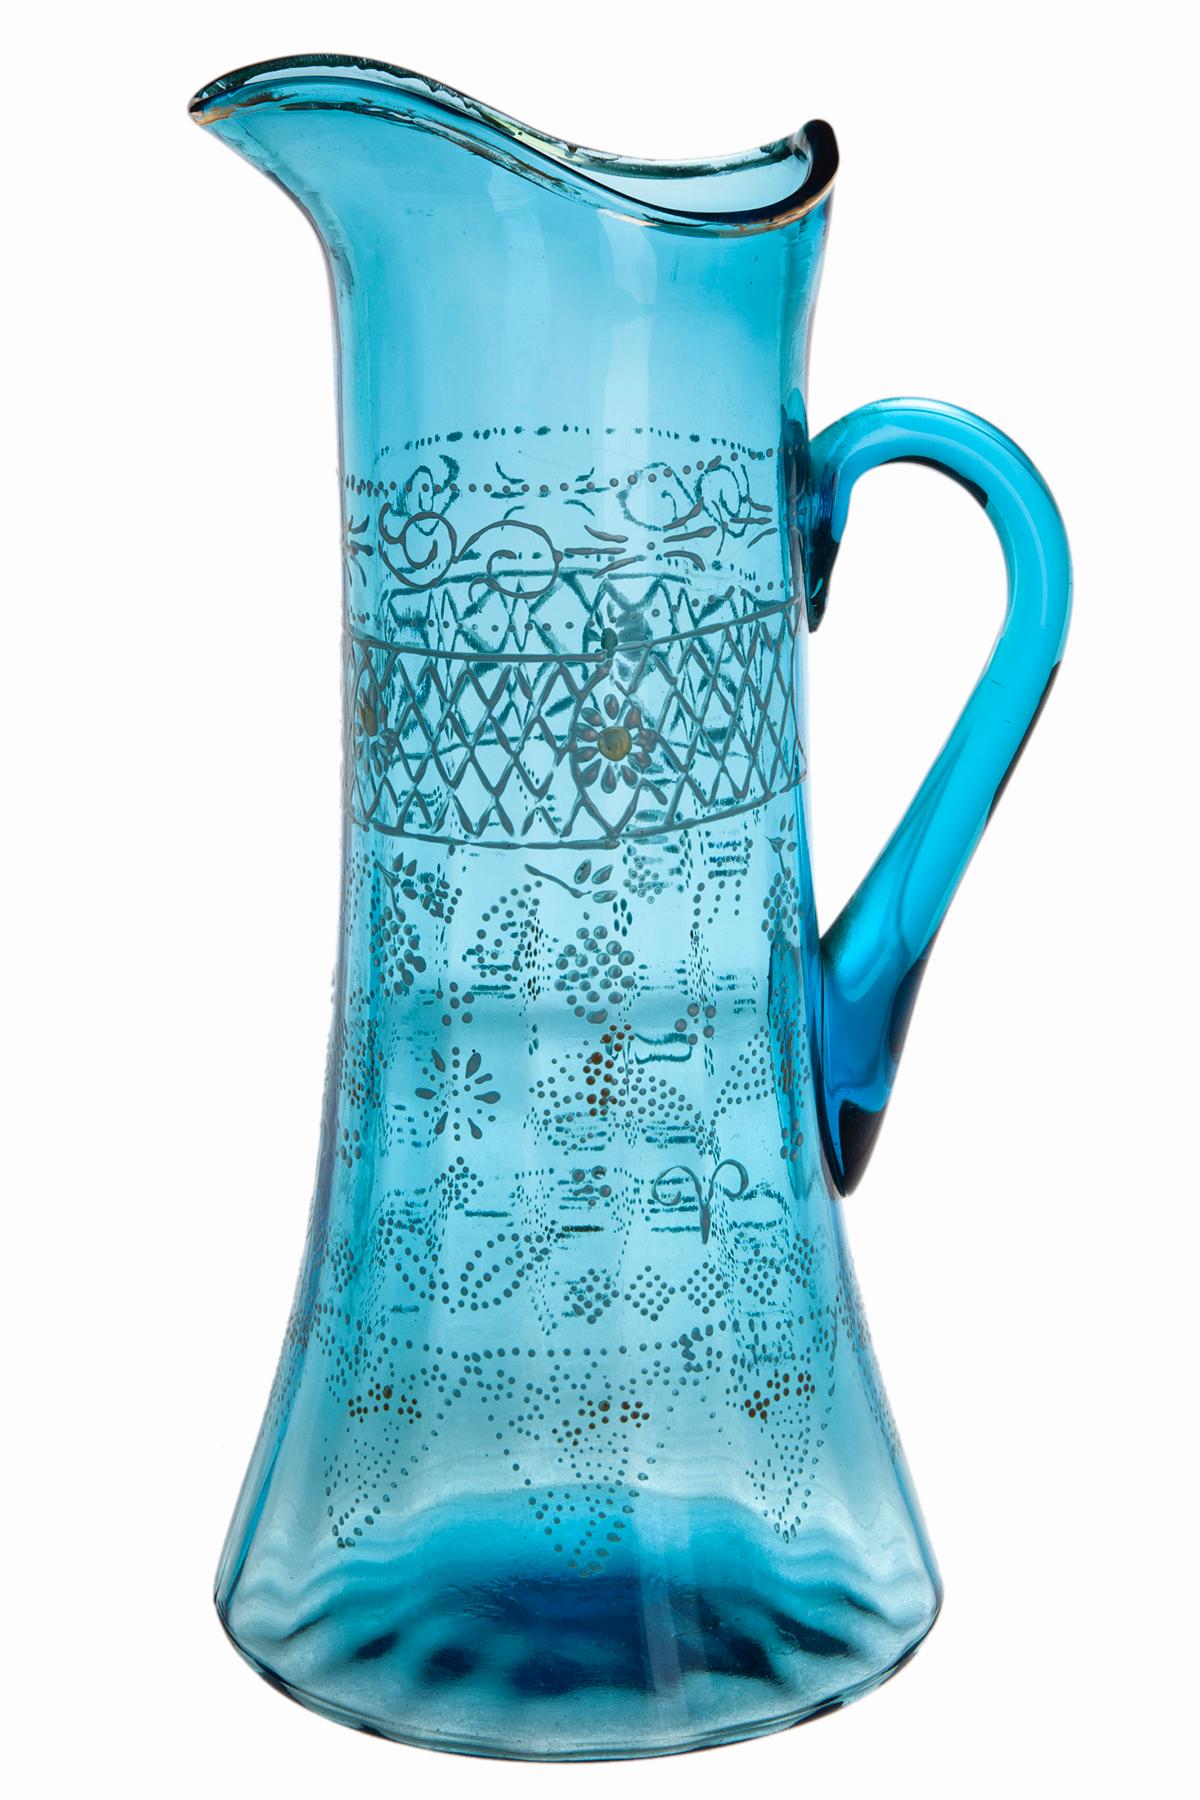 Late 19th C/early 20th C brilliant translucent aqua blue hand blown glass pitcher w/ applied handle. Gilt rim & accents hand painted in enamel with intricate patterns throughout.